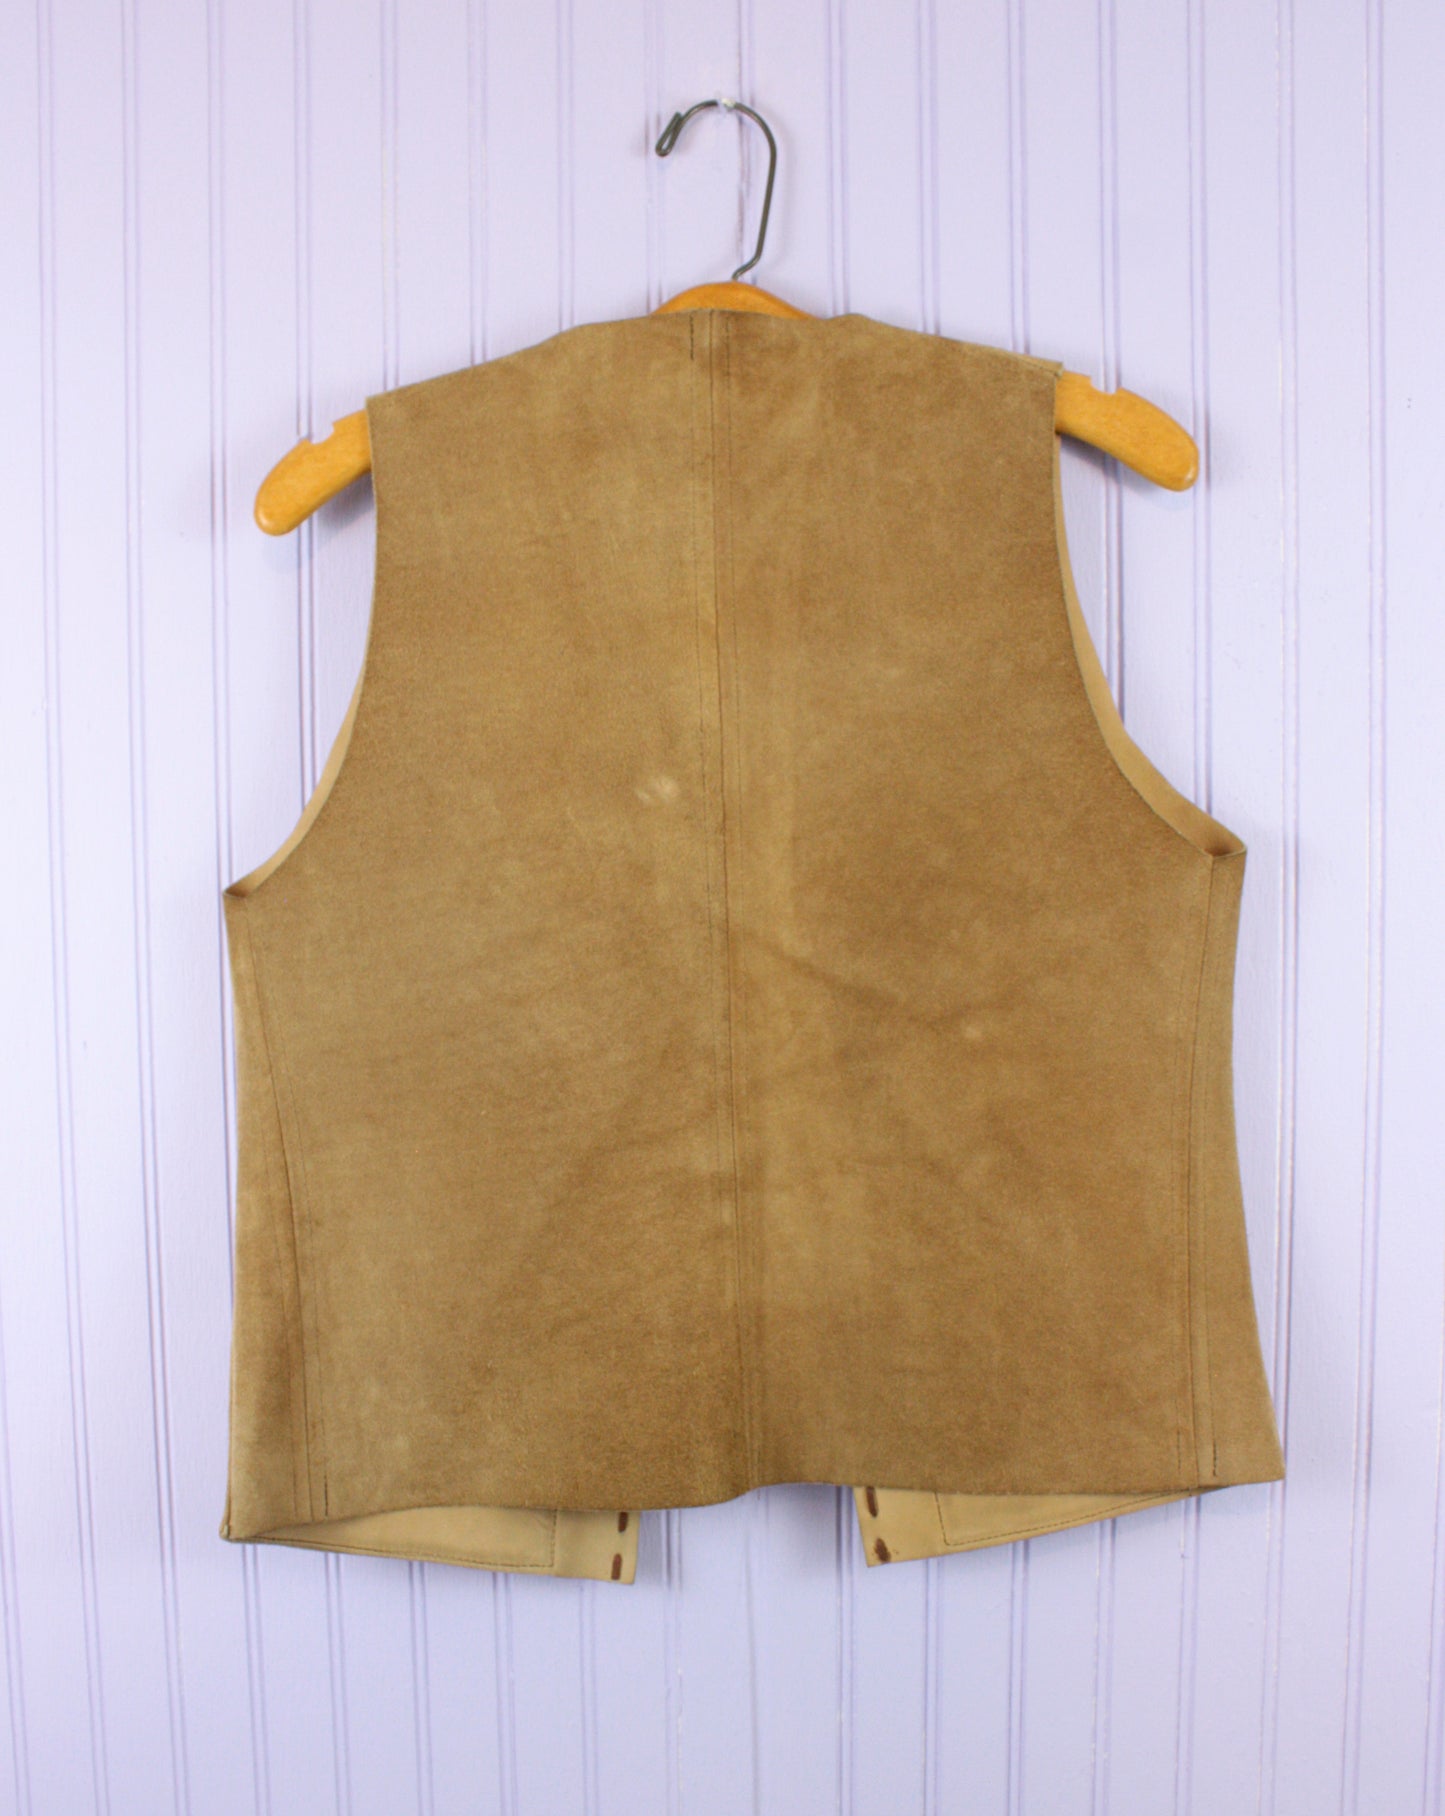 Leather Rawhide Vest 1970's